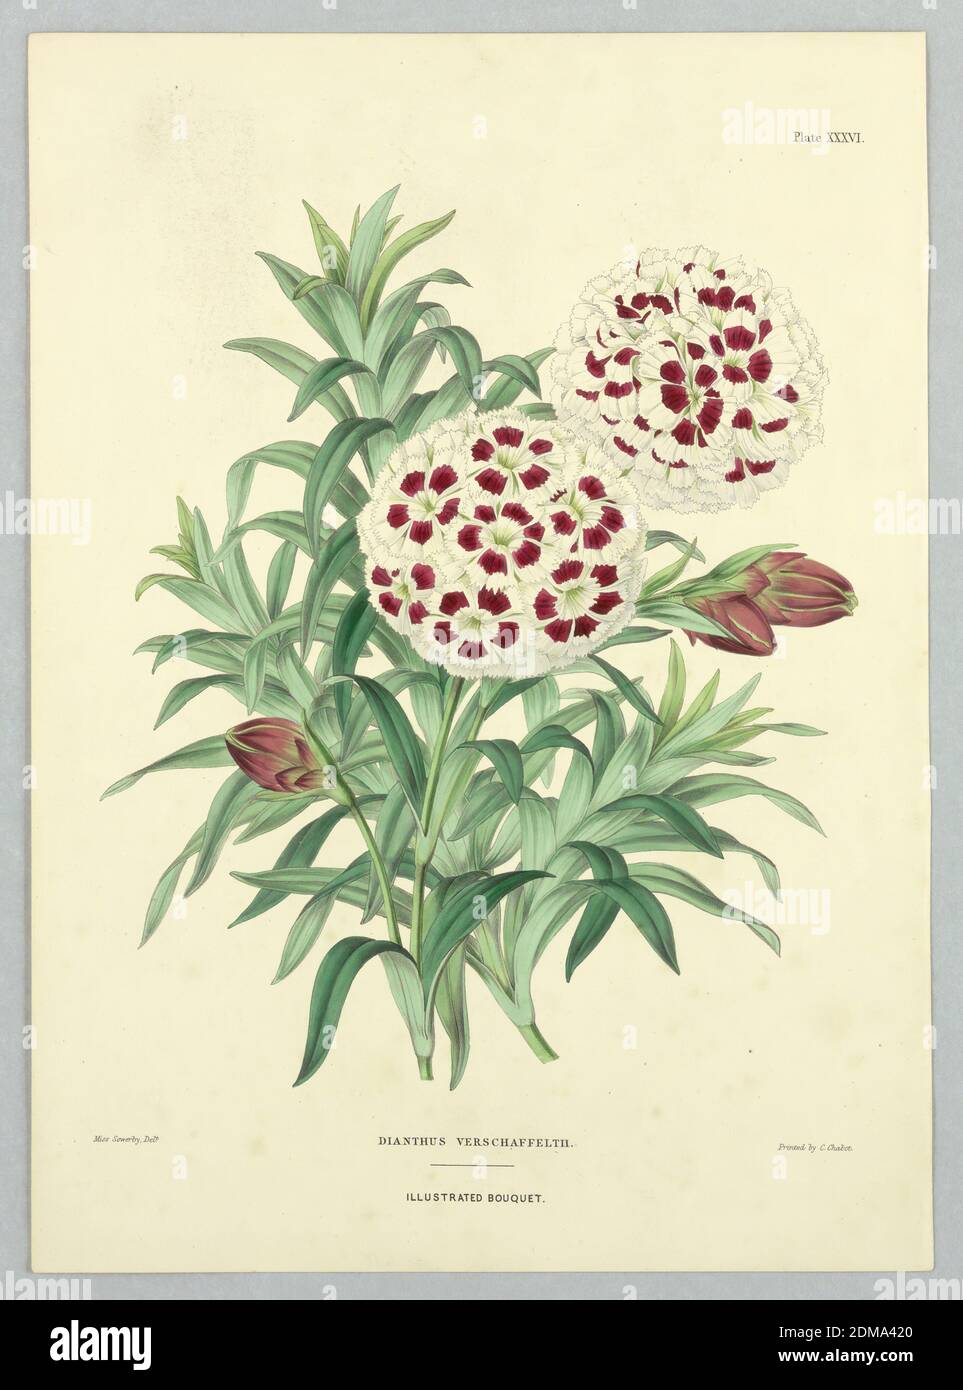 Dianthuis verschaffelthii, Plate XXXVI from Edward George Henderson's 'The Illustrated Bouquet', Miss Sowerby, English, active 19th c., E. G. Henderson and Son, English, ca. 1859 - 1886, Chromolithograph on paper, Dianthuis verschaffelthii, Plate XXXVI from Edward George Henderson's 'The Illustrated Bouquet', London, England, ca. 1857–1864, Print Stock Photo